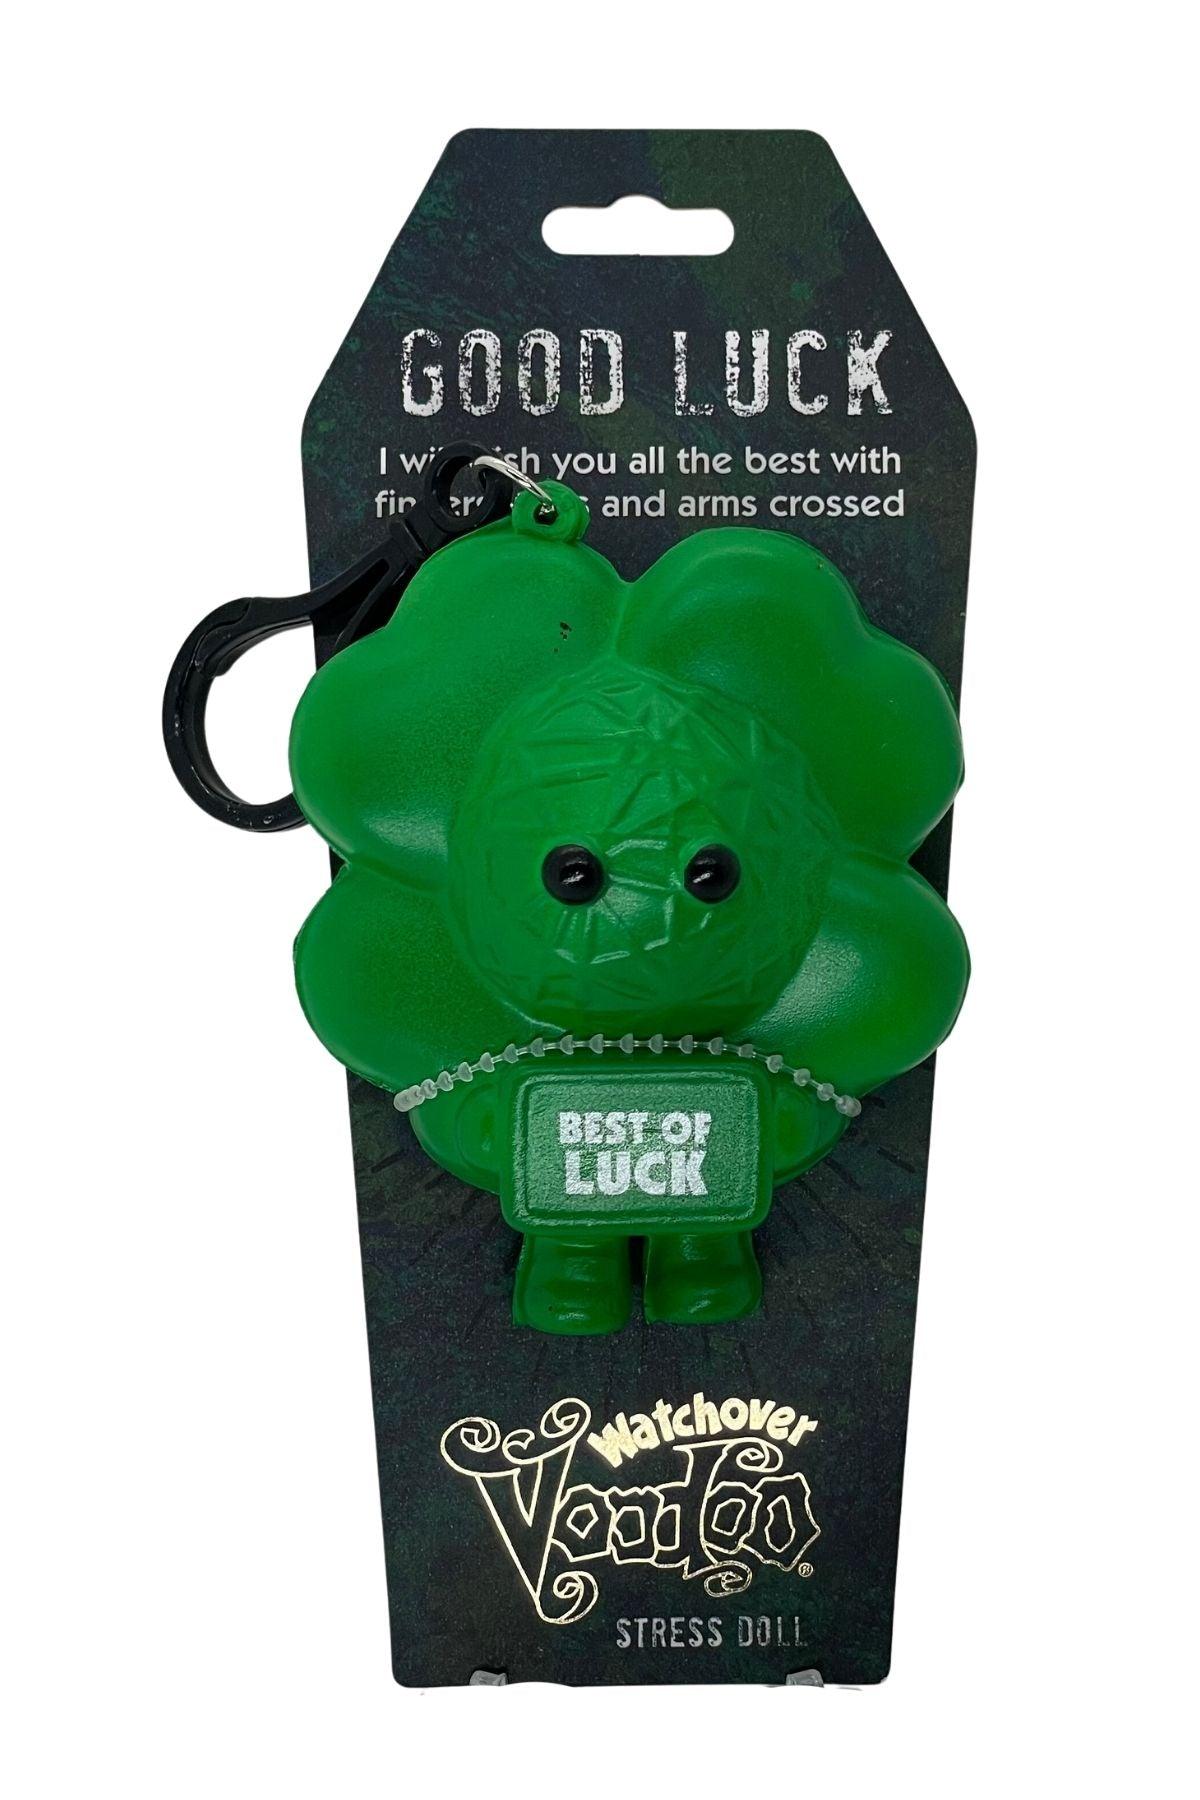 Voodoo Stress Doll - Good Luck - Watchover Voodoo - Stress Doll